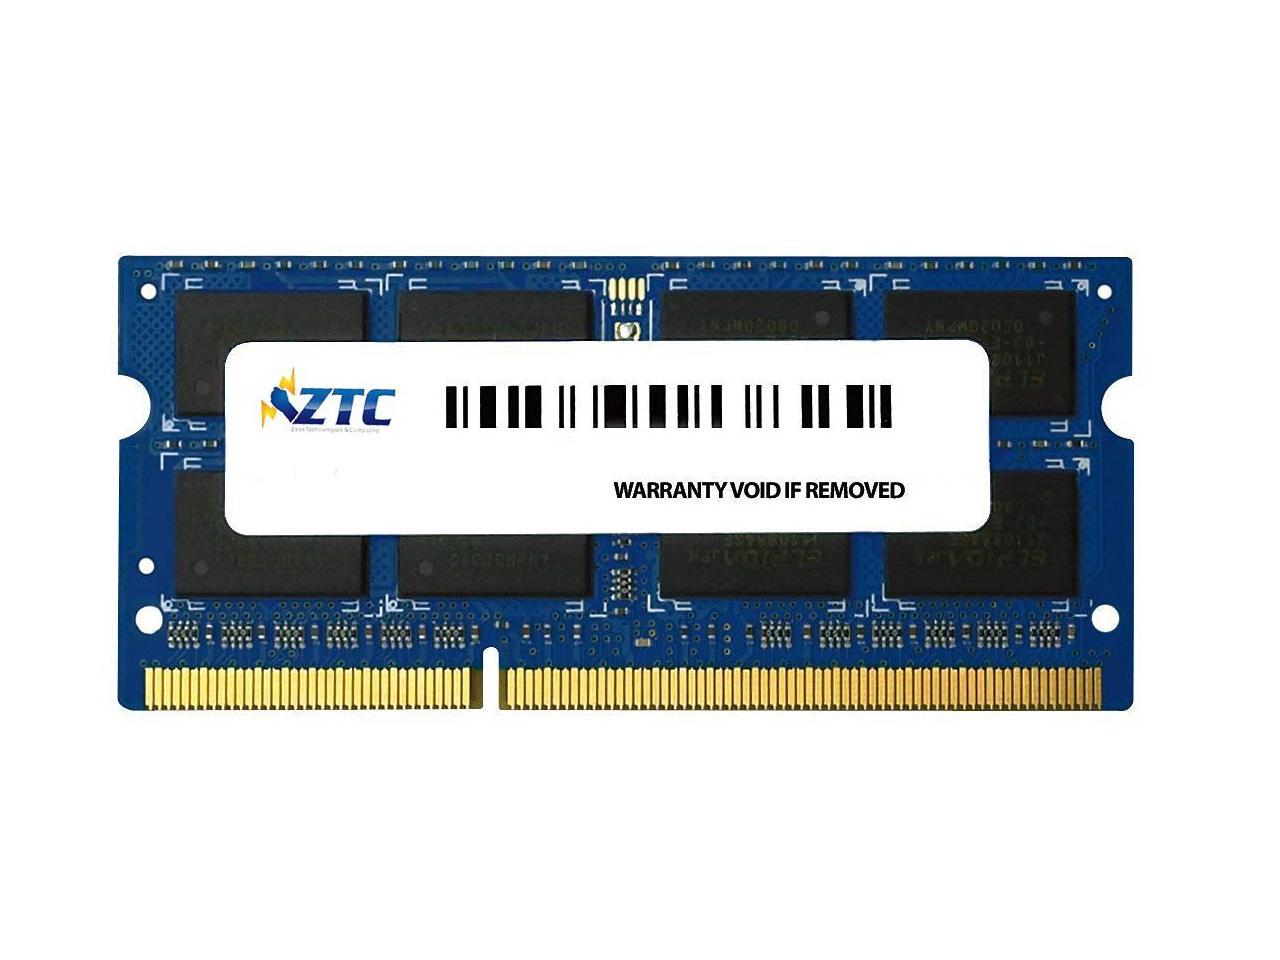 8.0GB PC3-12800 DDR3L 1600MHz SO-DIMM 204 Pin CL11 SO-DIMM Memory Module for 2012 MacBook Pro Models (Non-Retina Display)